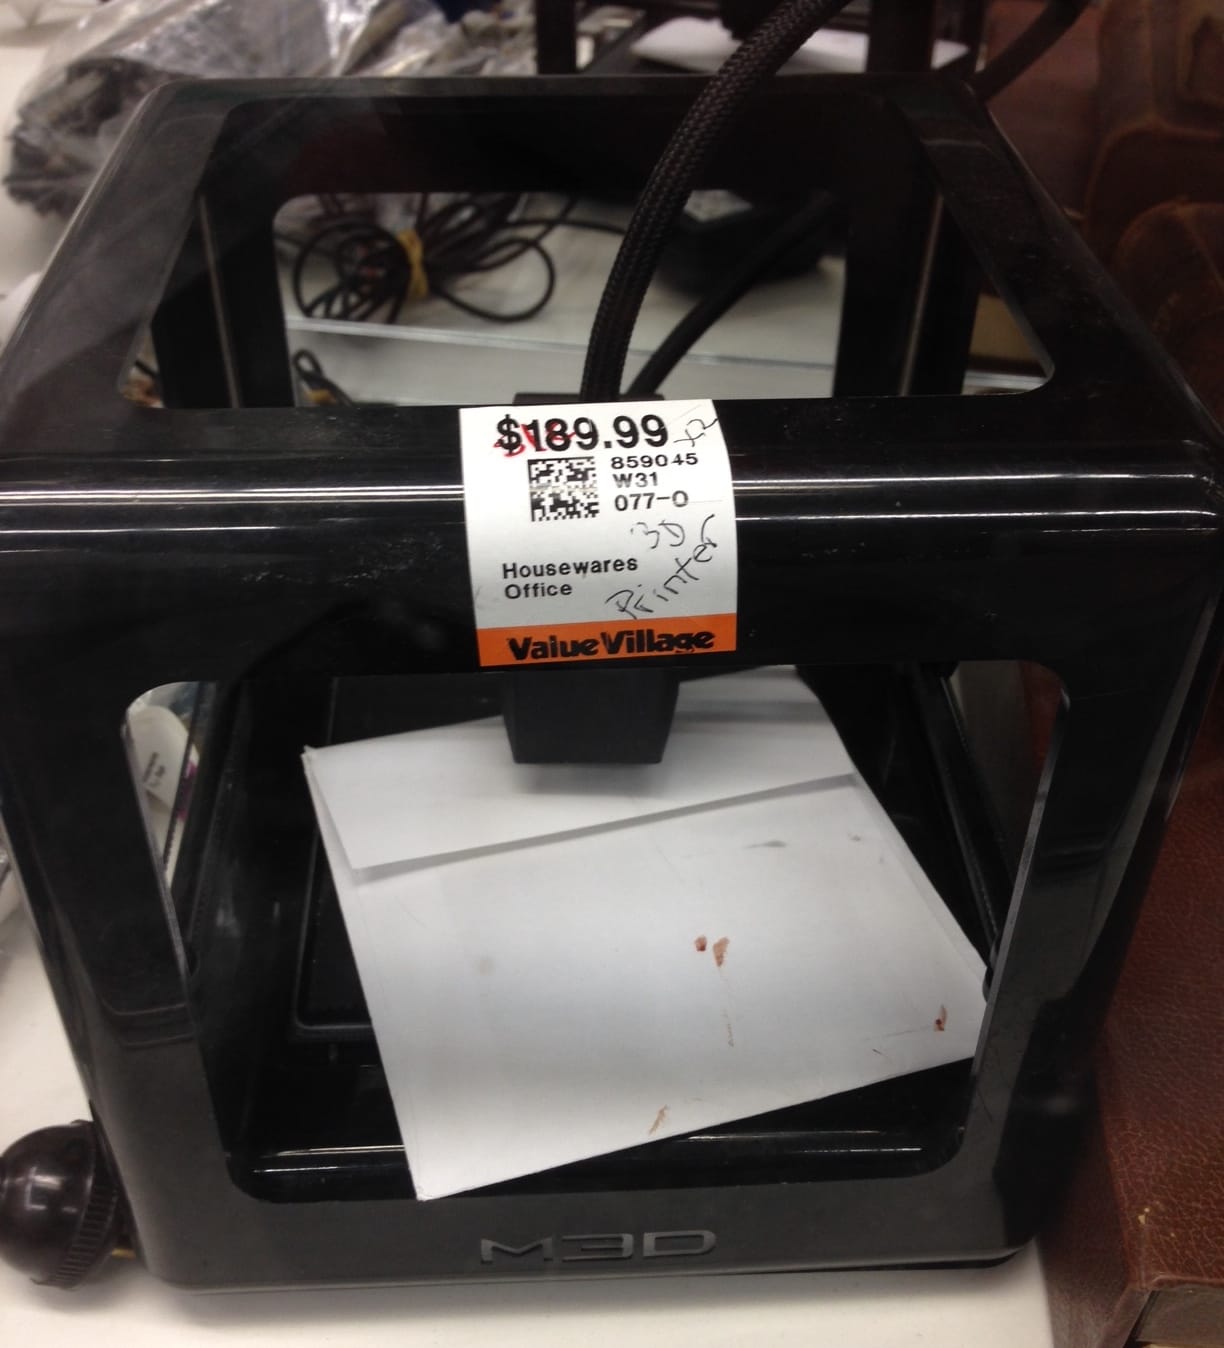  The whole view of the bargain 3D printer, which appears to be a M3D Micro 